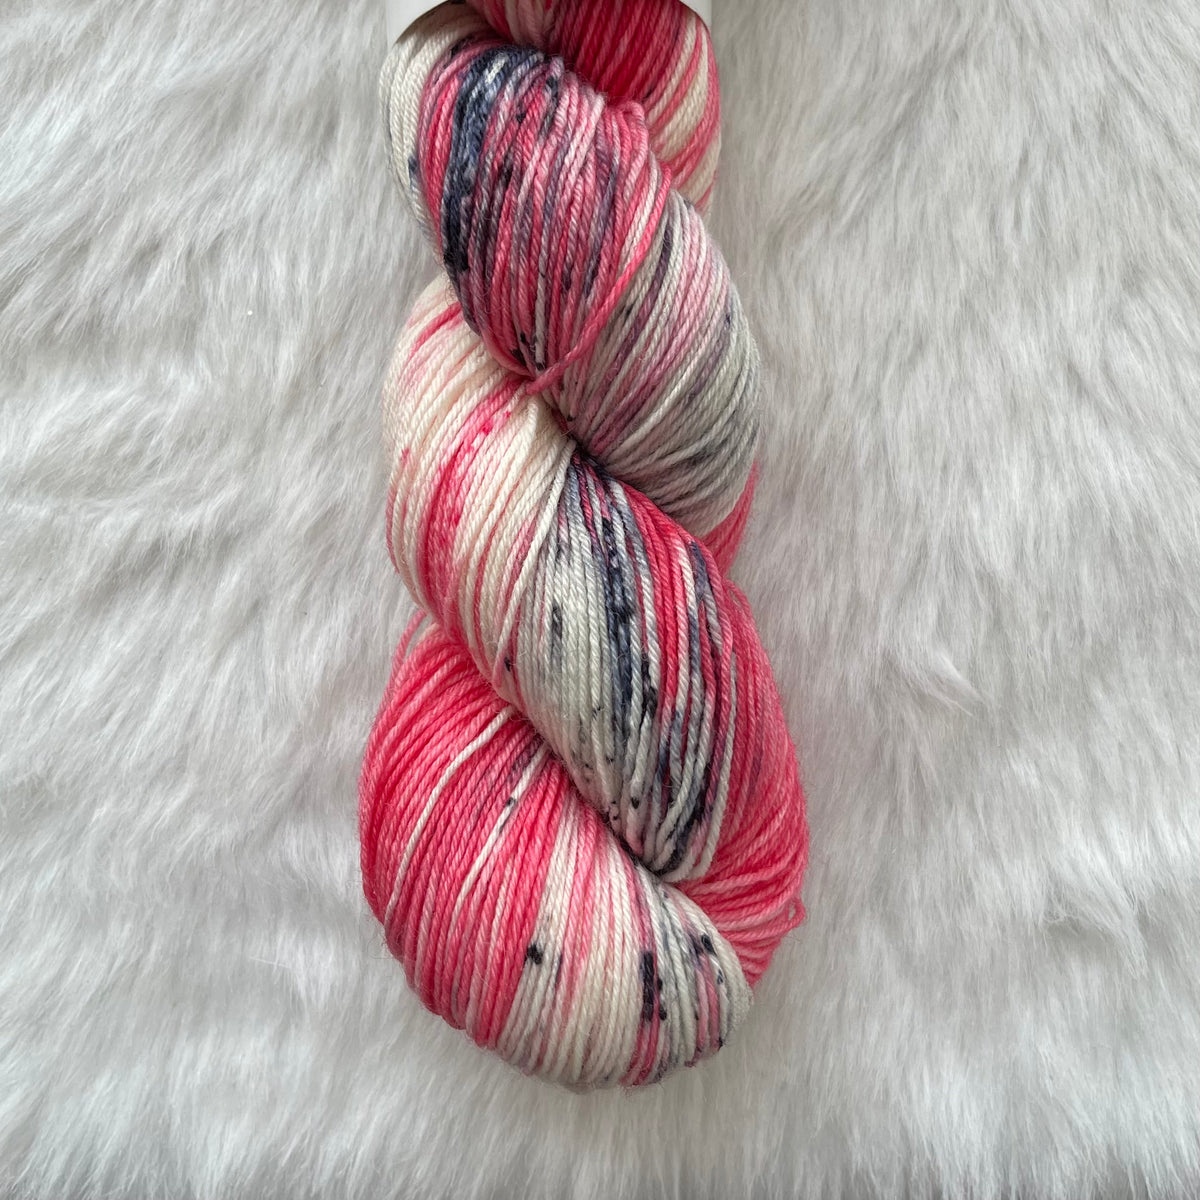 FREE ENERGY -Ready to Ship - BFL Sock- Hand Dyed Yarn Skein